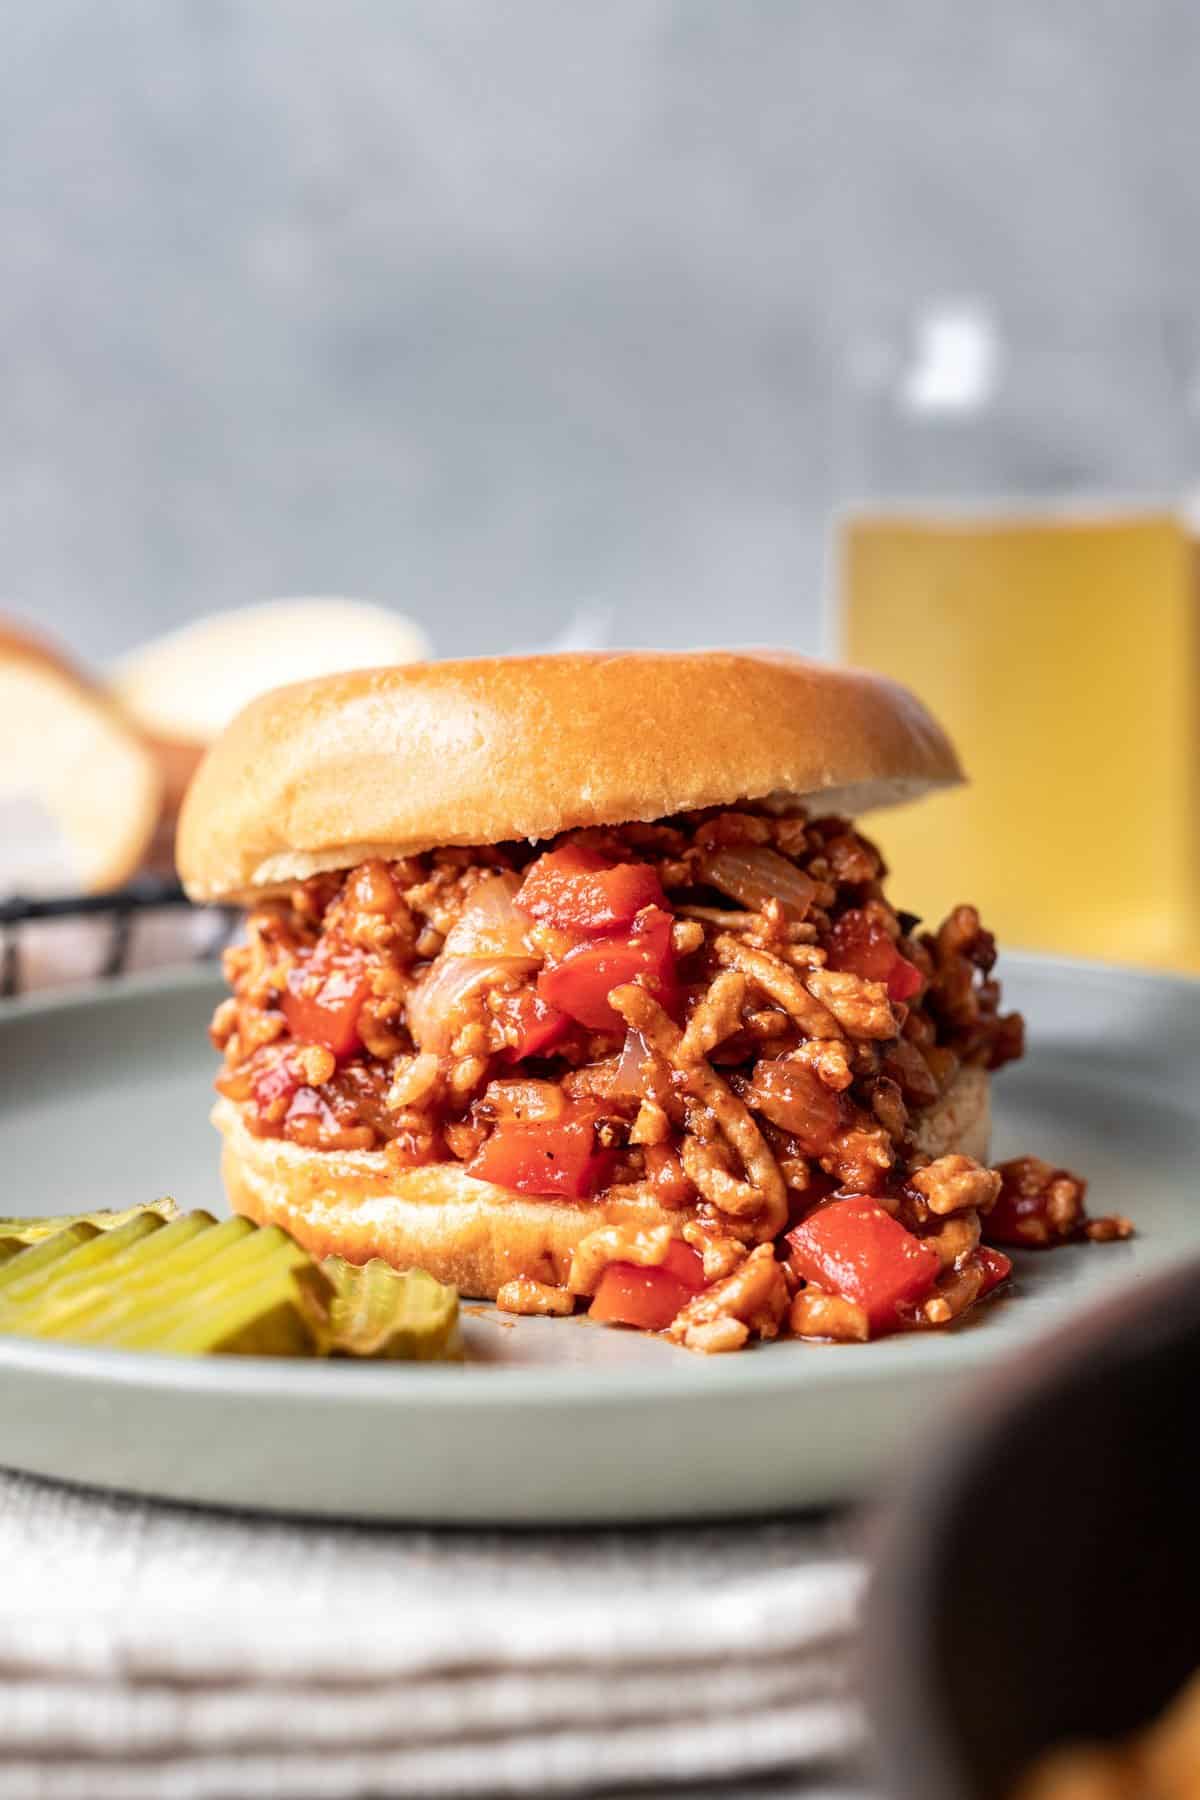 Ground chicken sloppy joes on a brioche bun with a side of pickle chips.